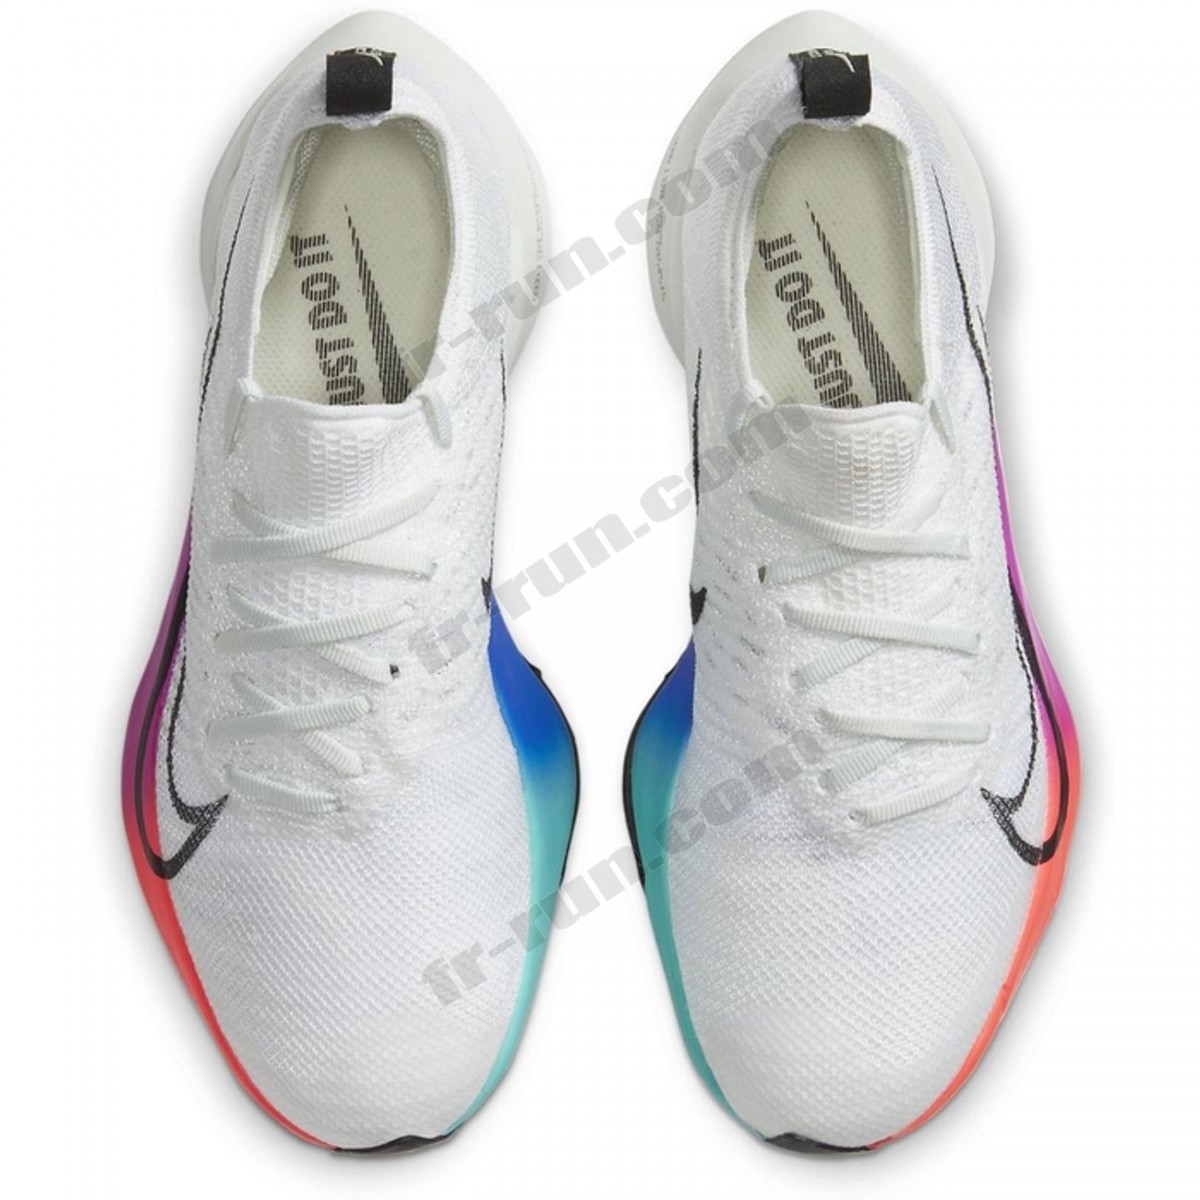 Nike/CHAUSSURES BASSES running femme NIKE W NIKE AIR ZOOM TEMPO NEXT% FK ◇◇◇ Pas Cher Du Tout - -2